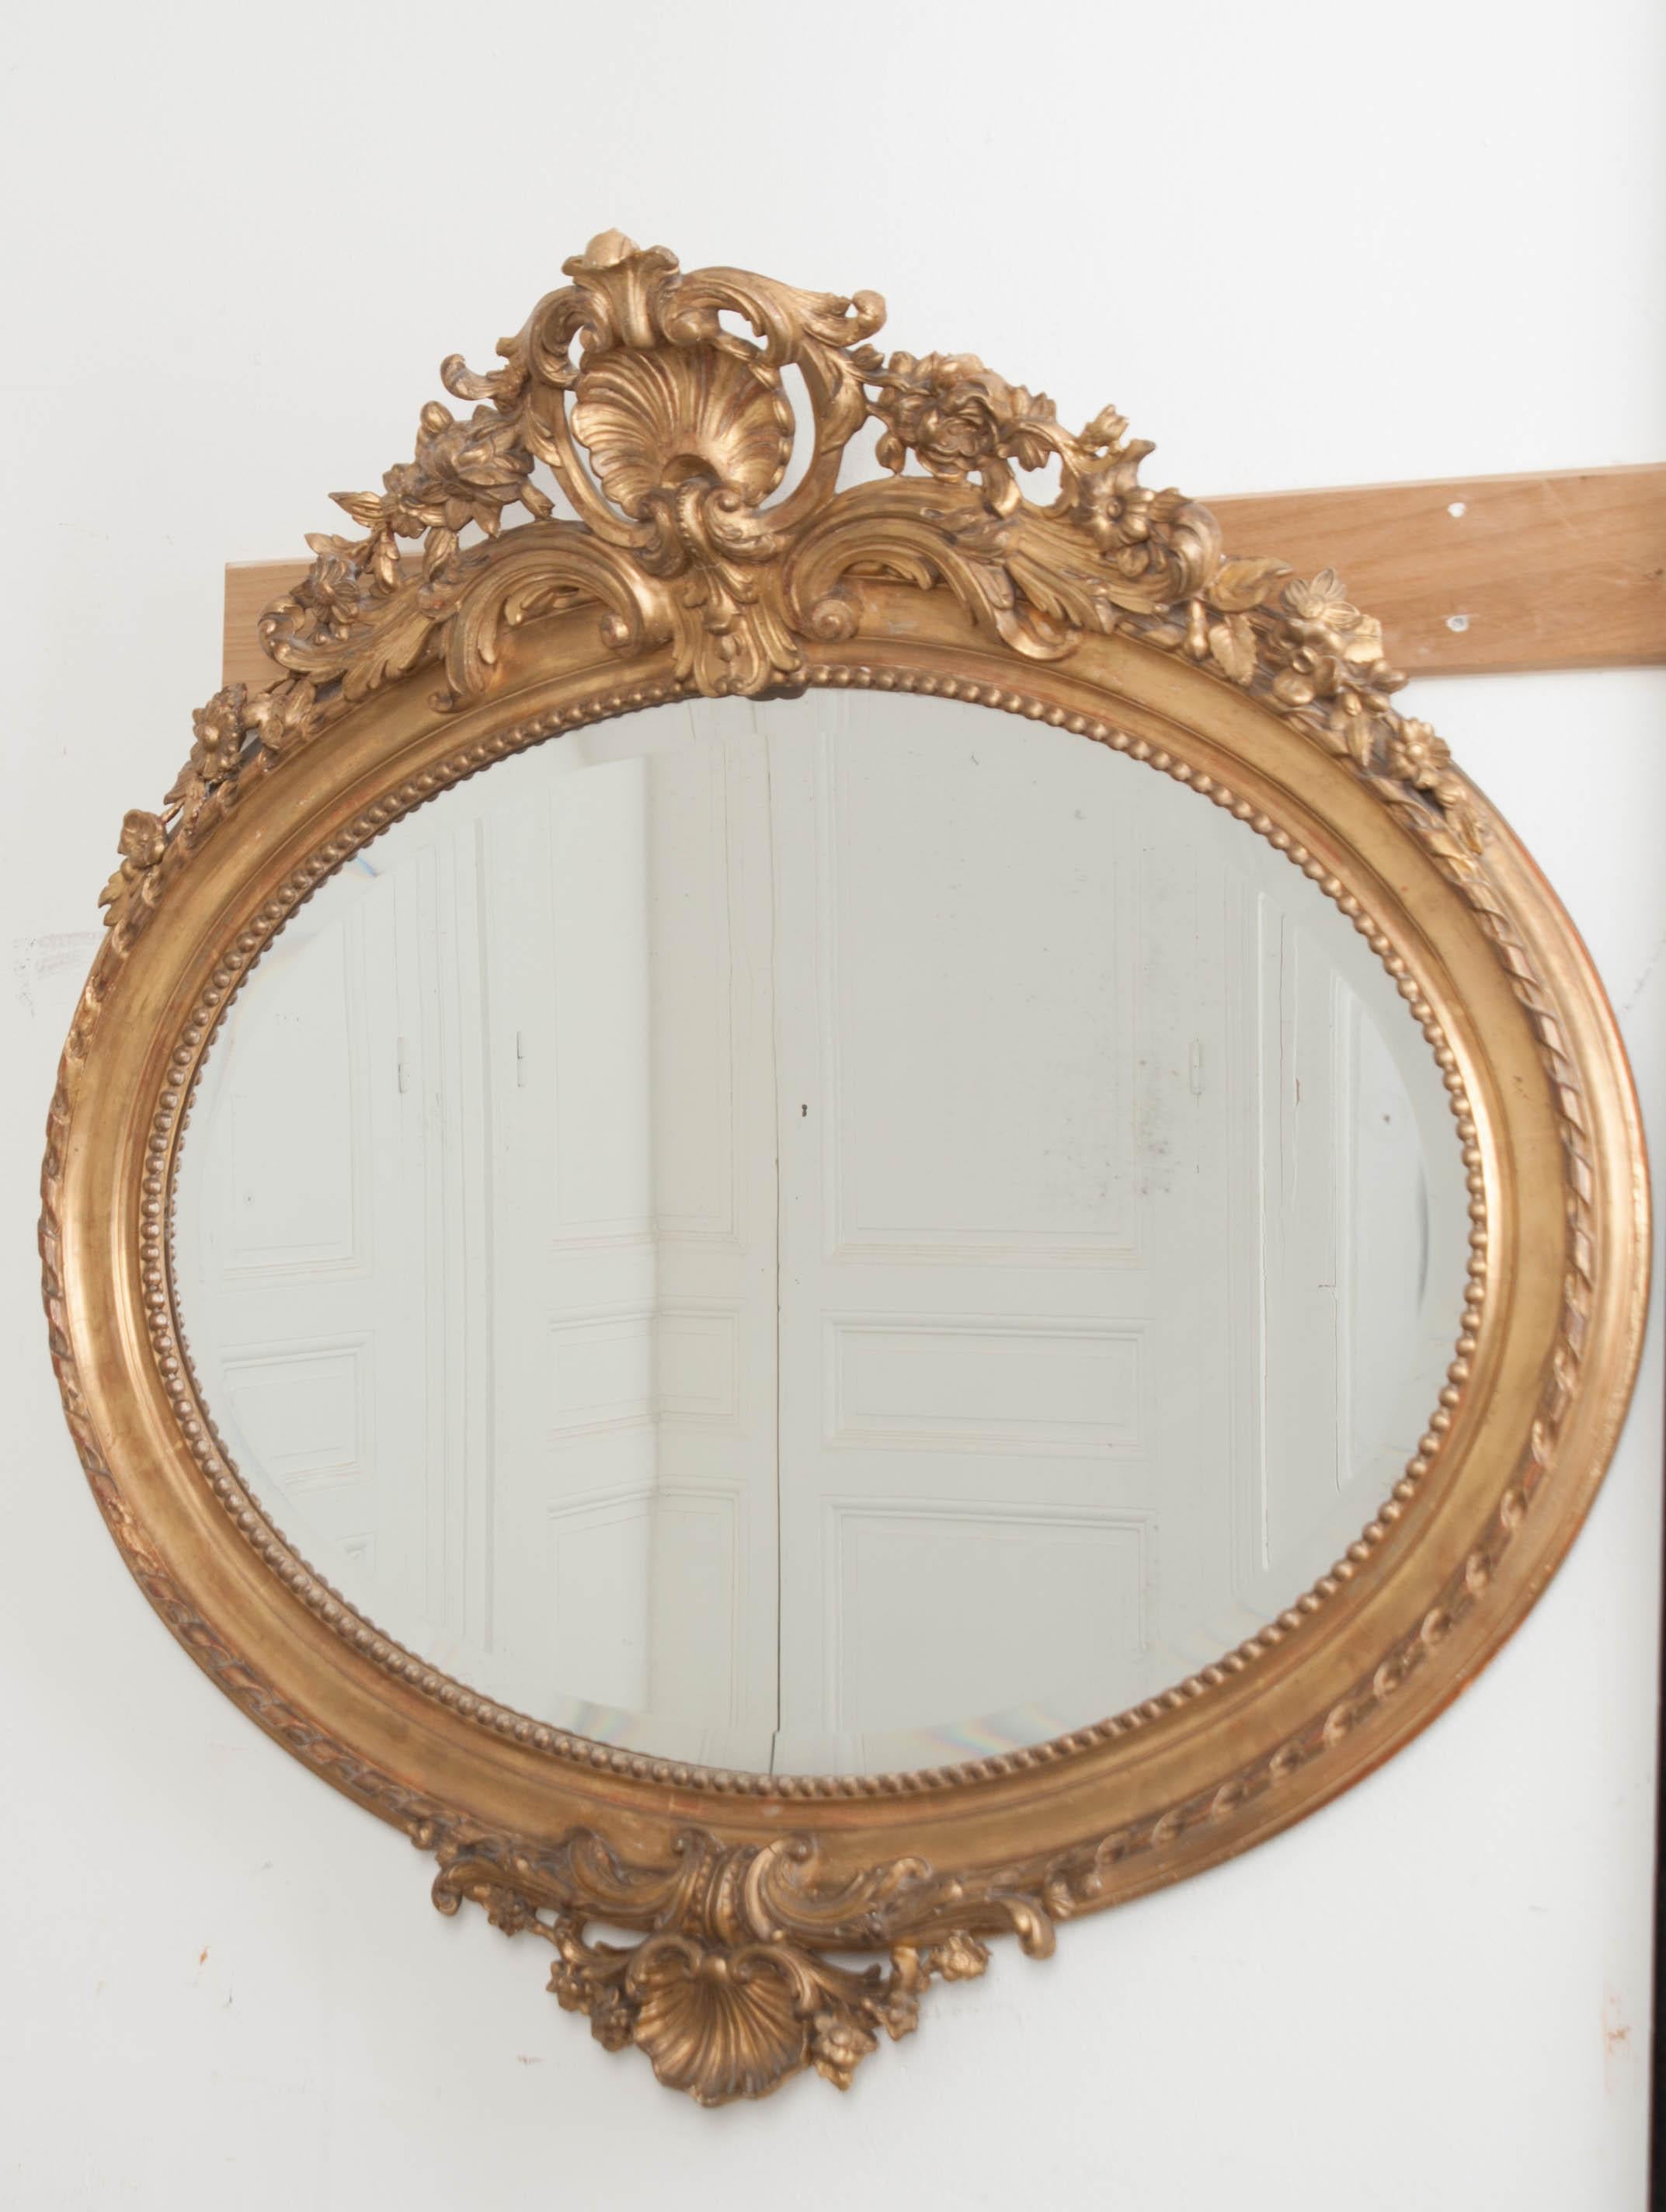 This stunning French 19th century ovoid giltwood mirror, with elaborate shell-carved crests, retains the original beveled glass mirror which displays foxing and an overall wonderful patina!